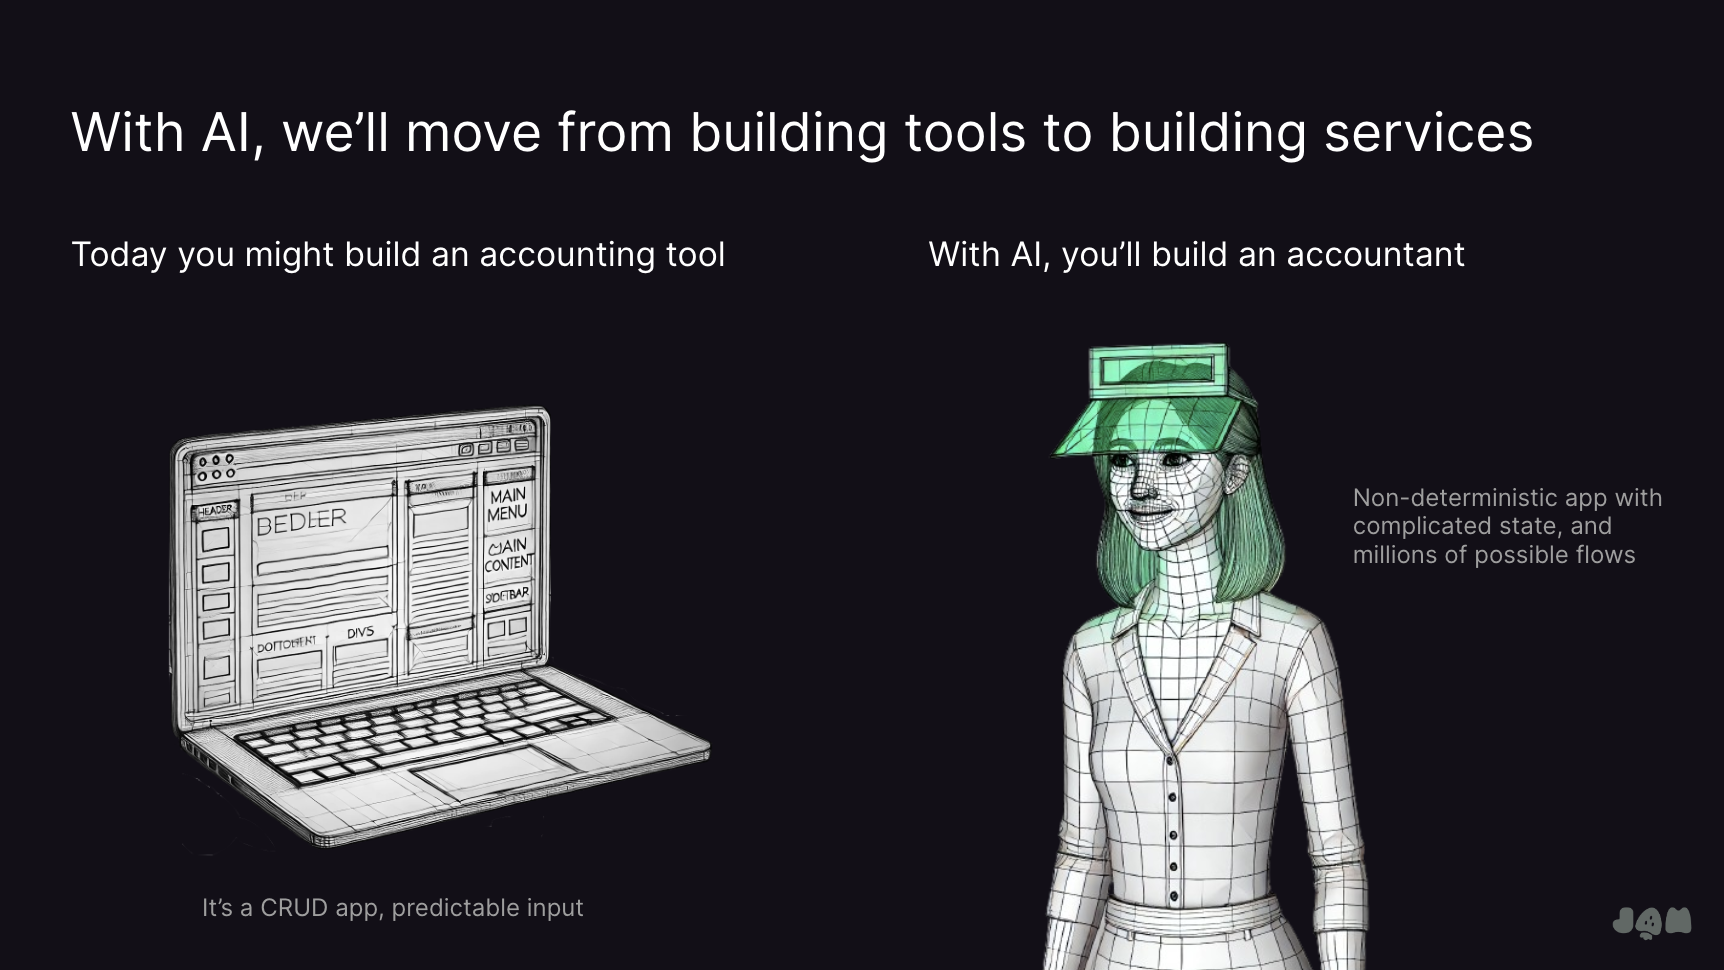 with AI we'll move from building tools to building services